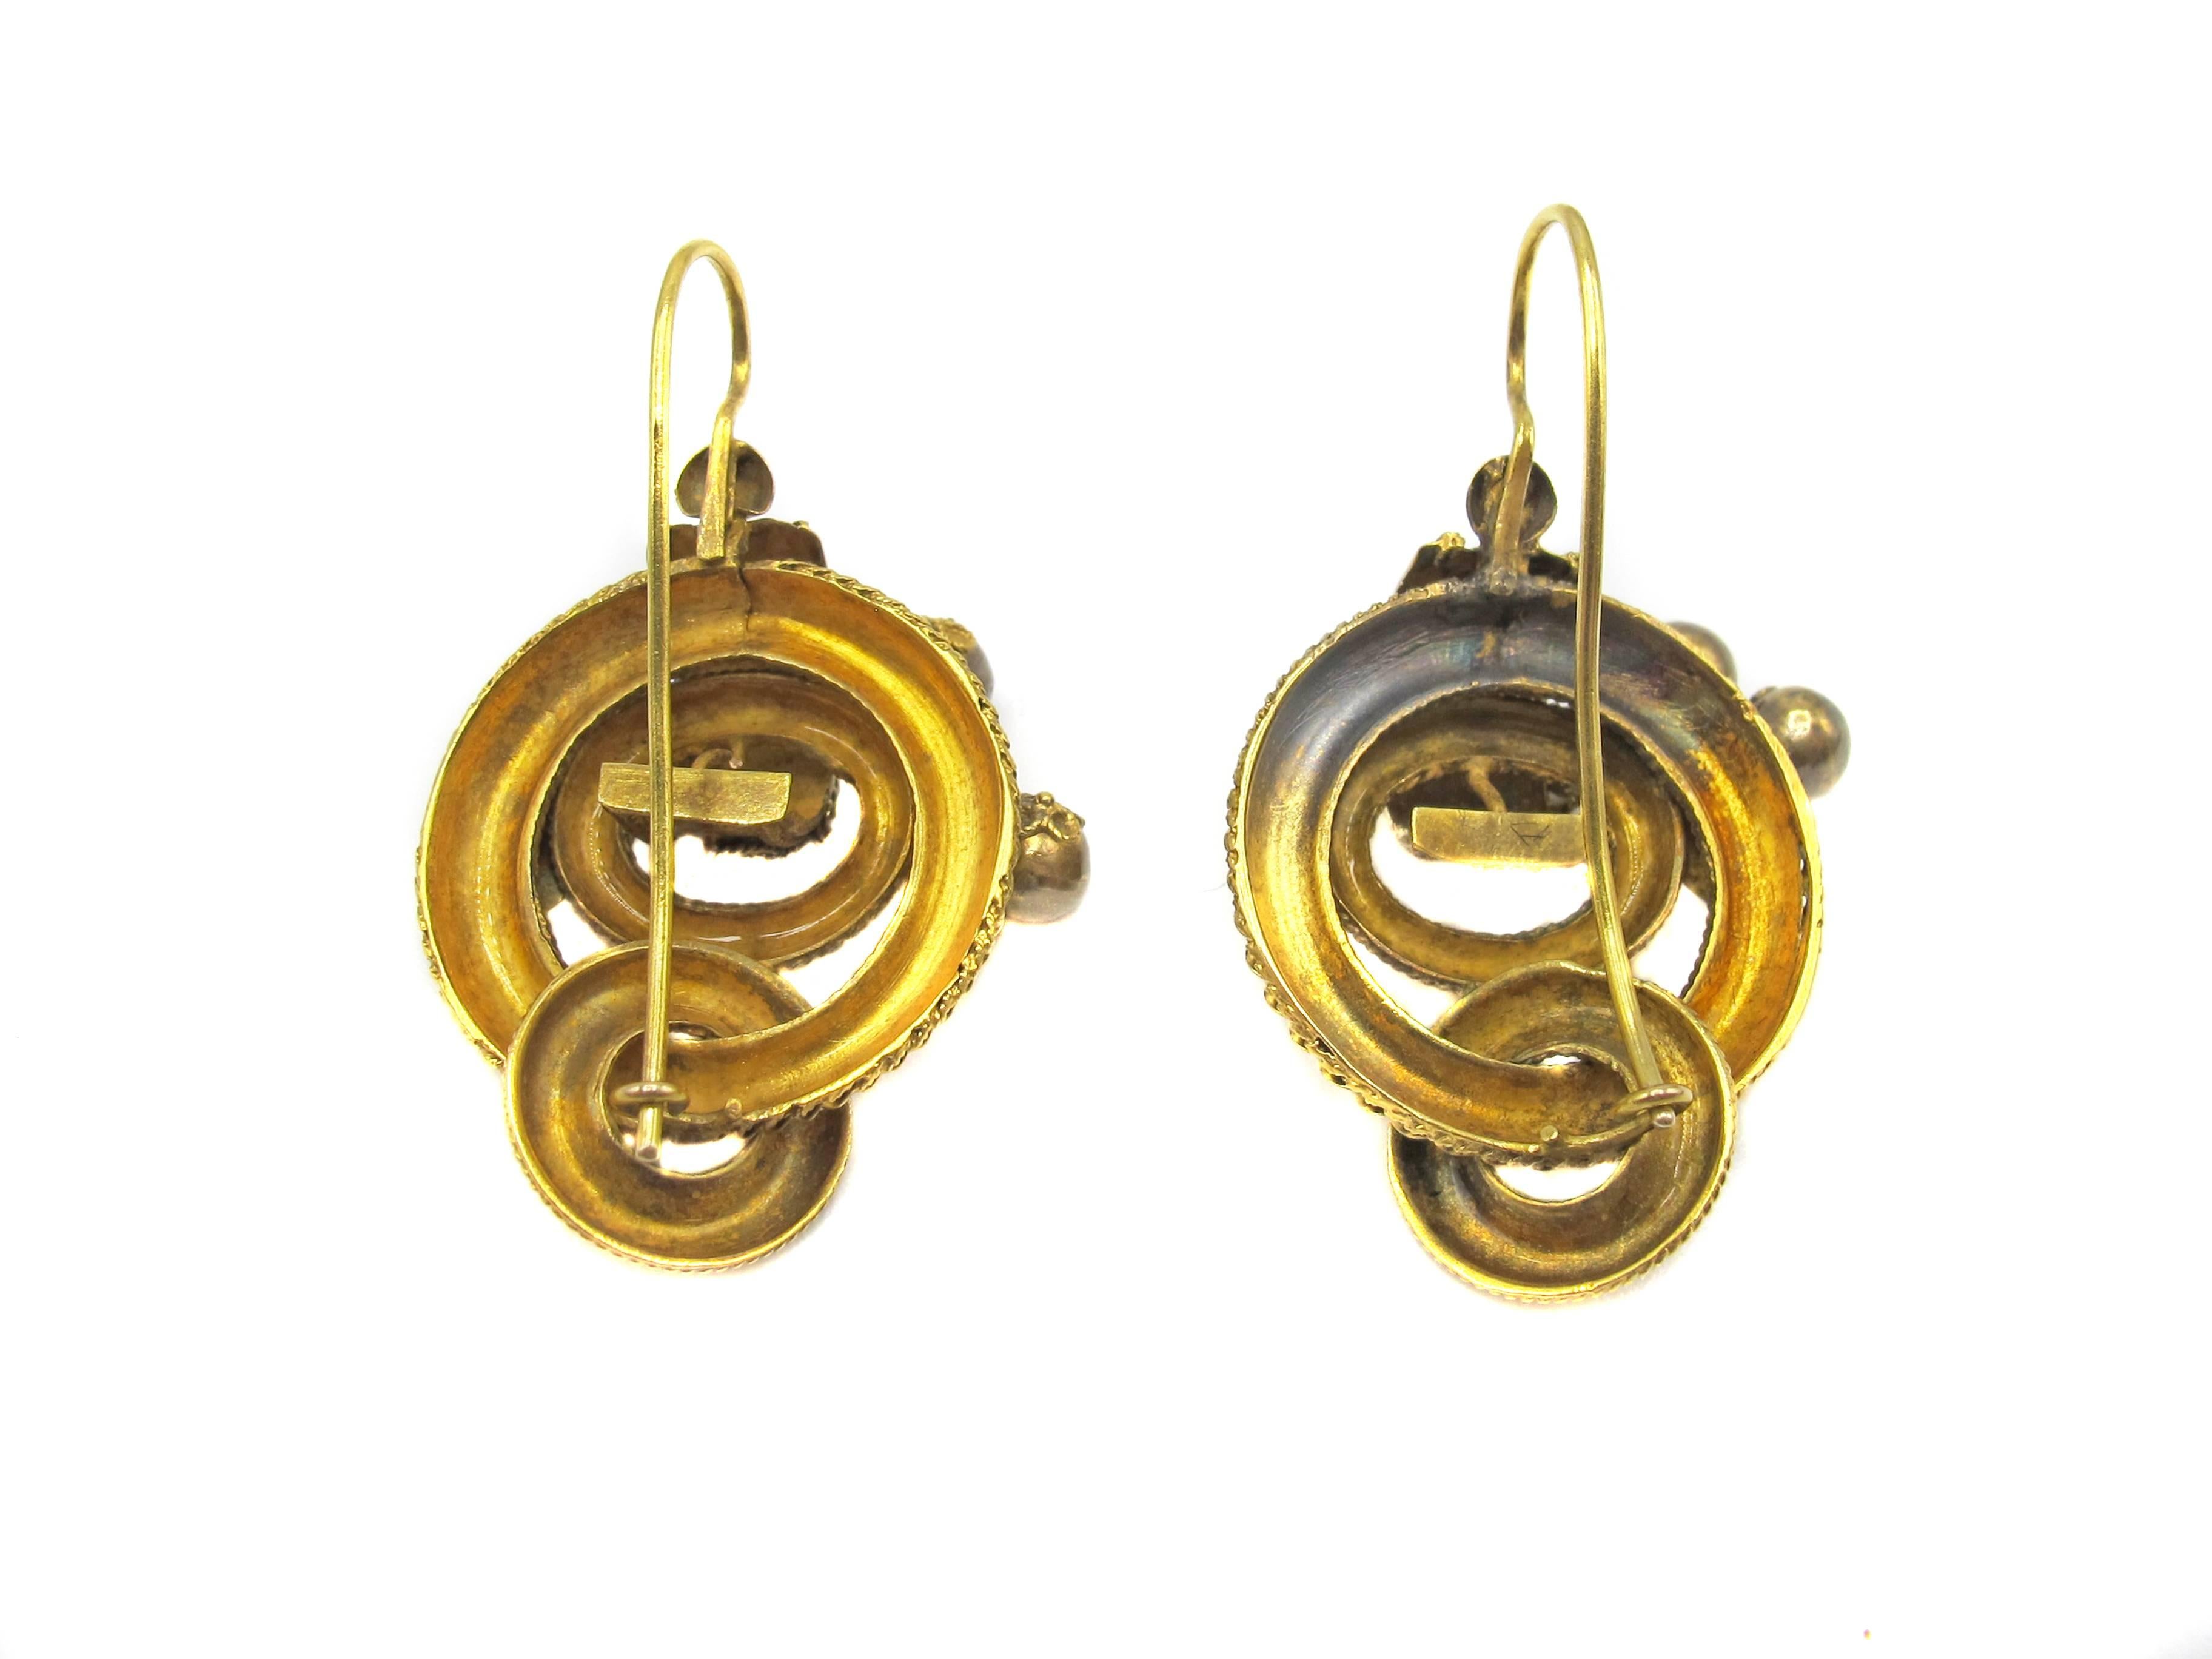 Beautiful 15 karat yellow gold Victorian ear pendants, skillfully handcrafted and designed out of 3 interlocking circles with detailed granular work on each of them. On the top of the outer ring, a leaf with fine detailed gold work showing it's